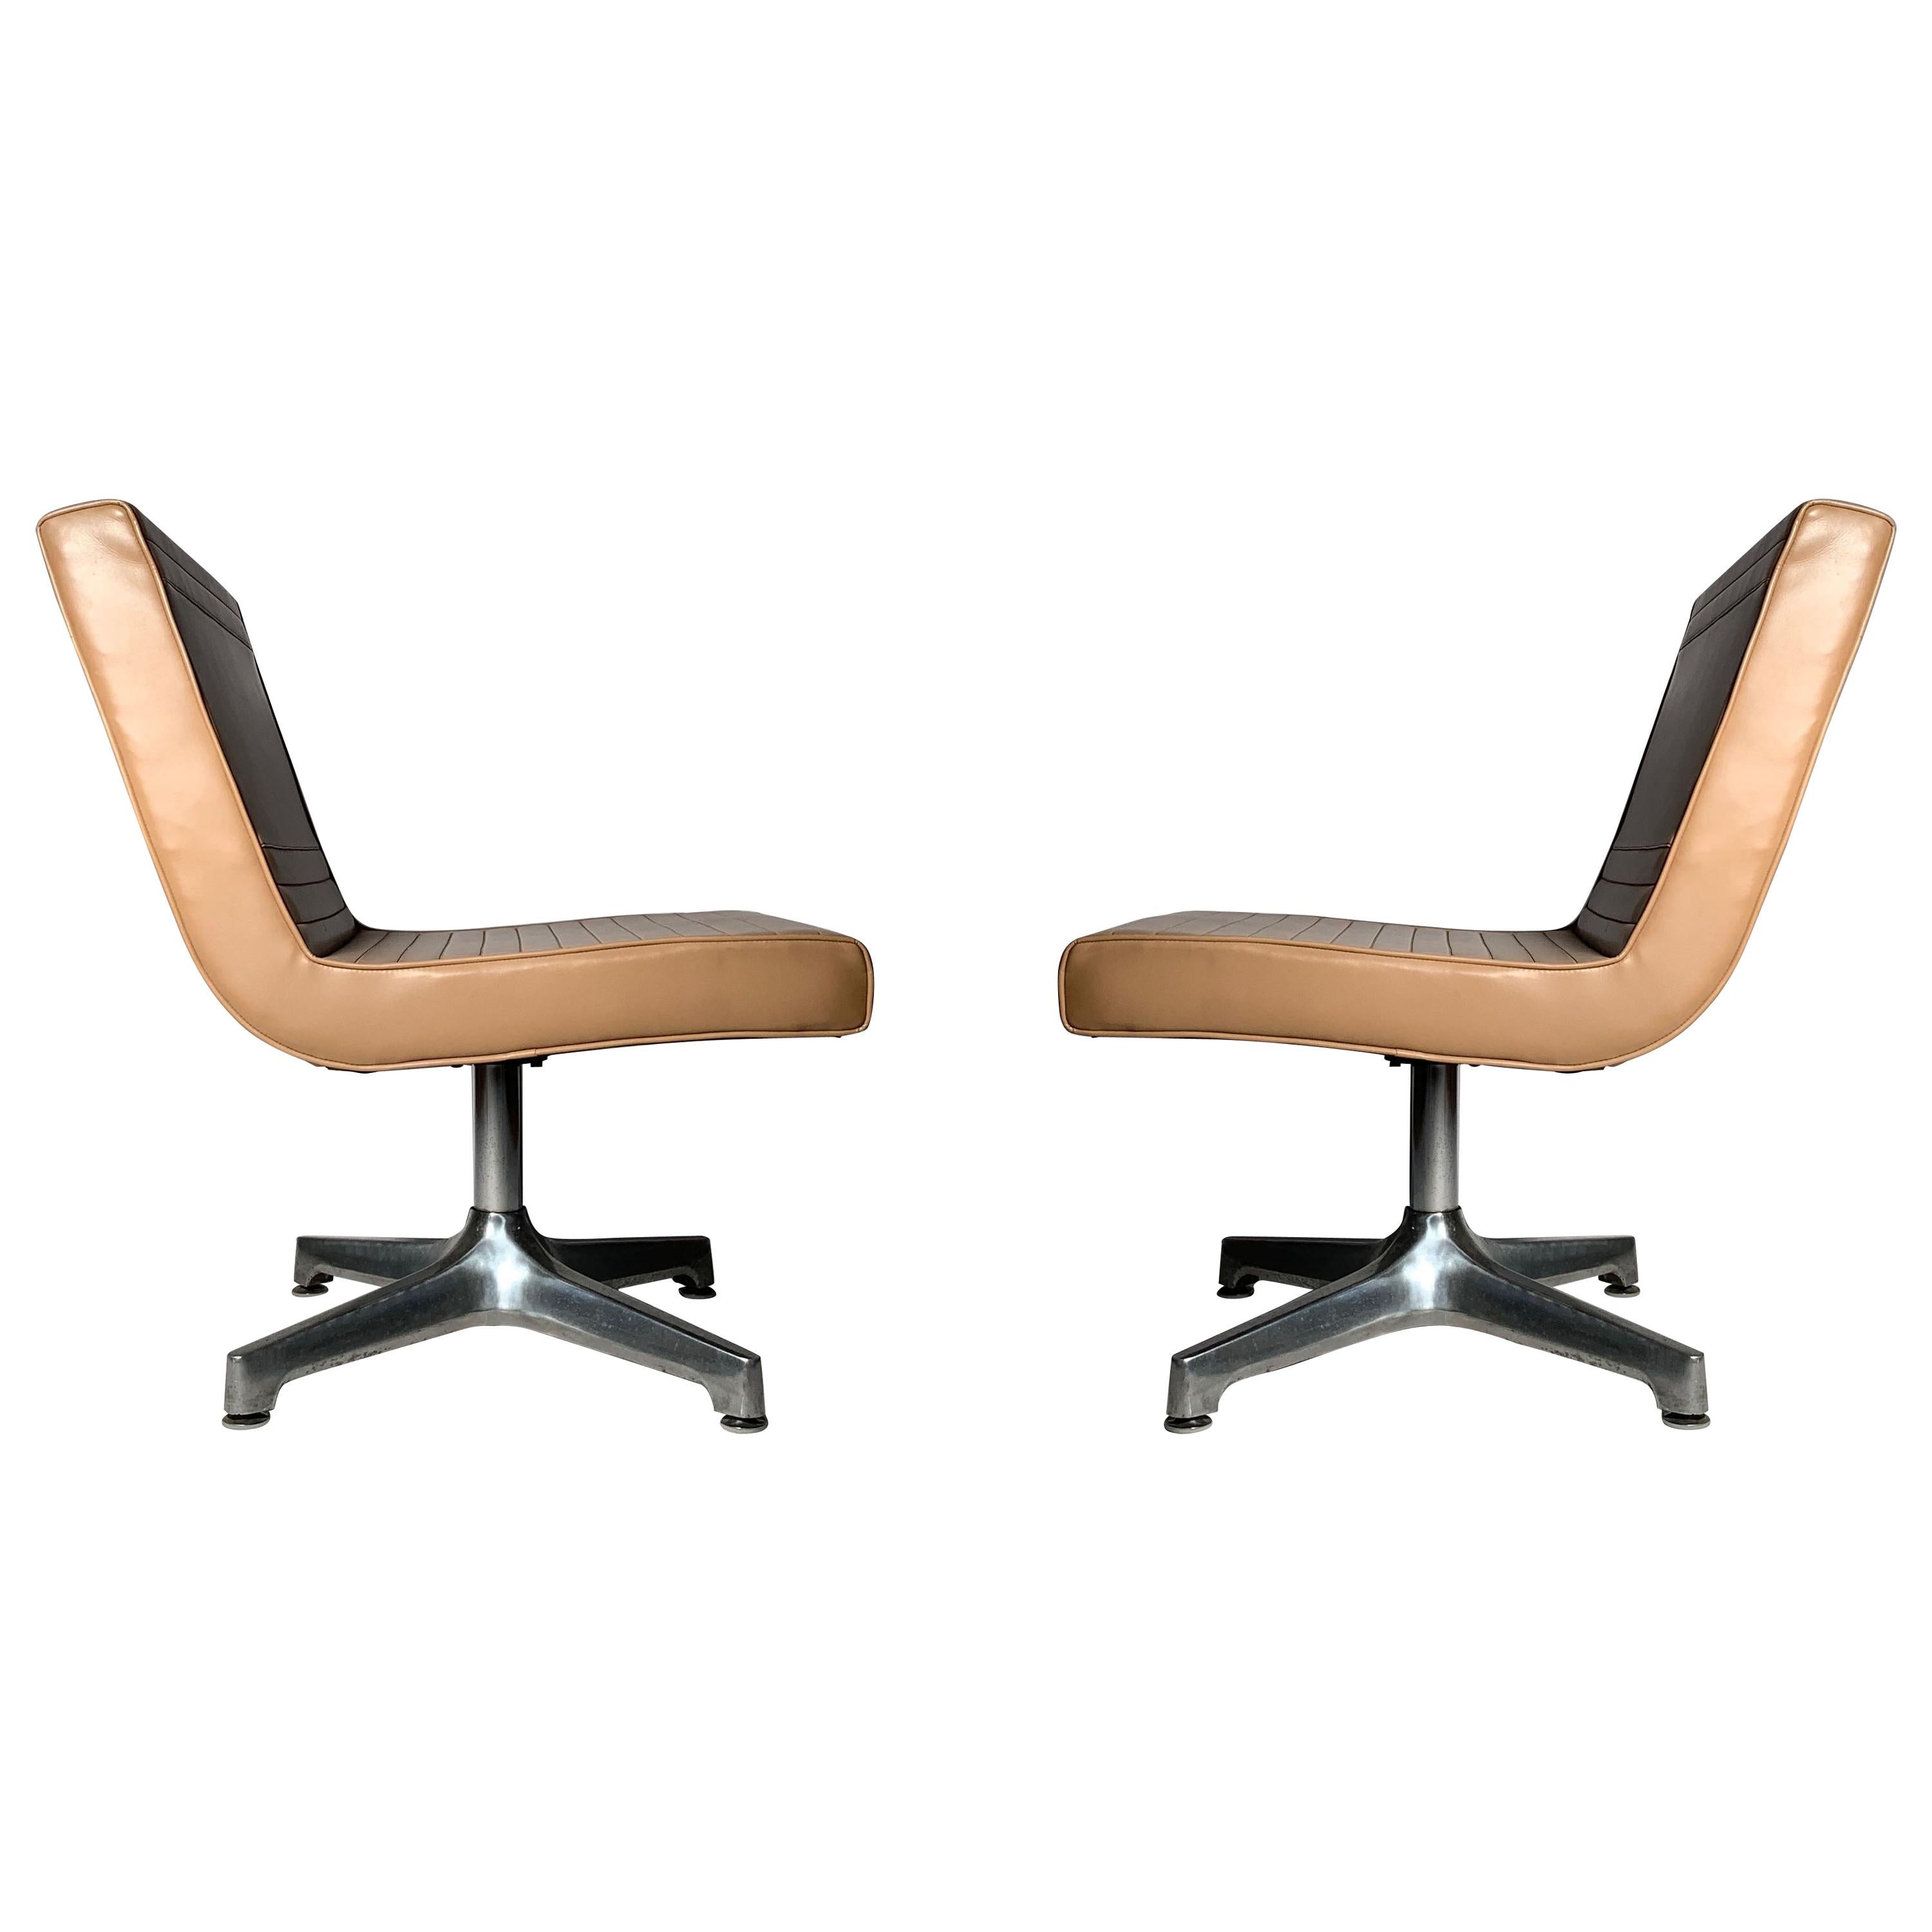 Vintage 1970s Techfab Chromcraft Latte Lounge Chairs For Sale